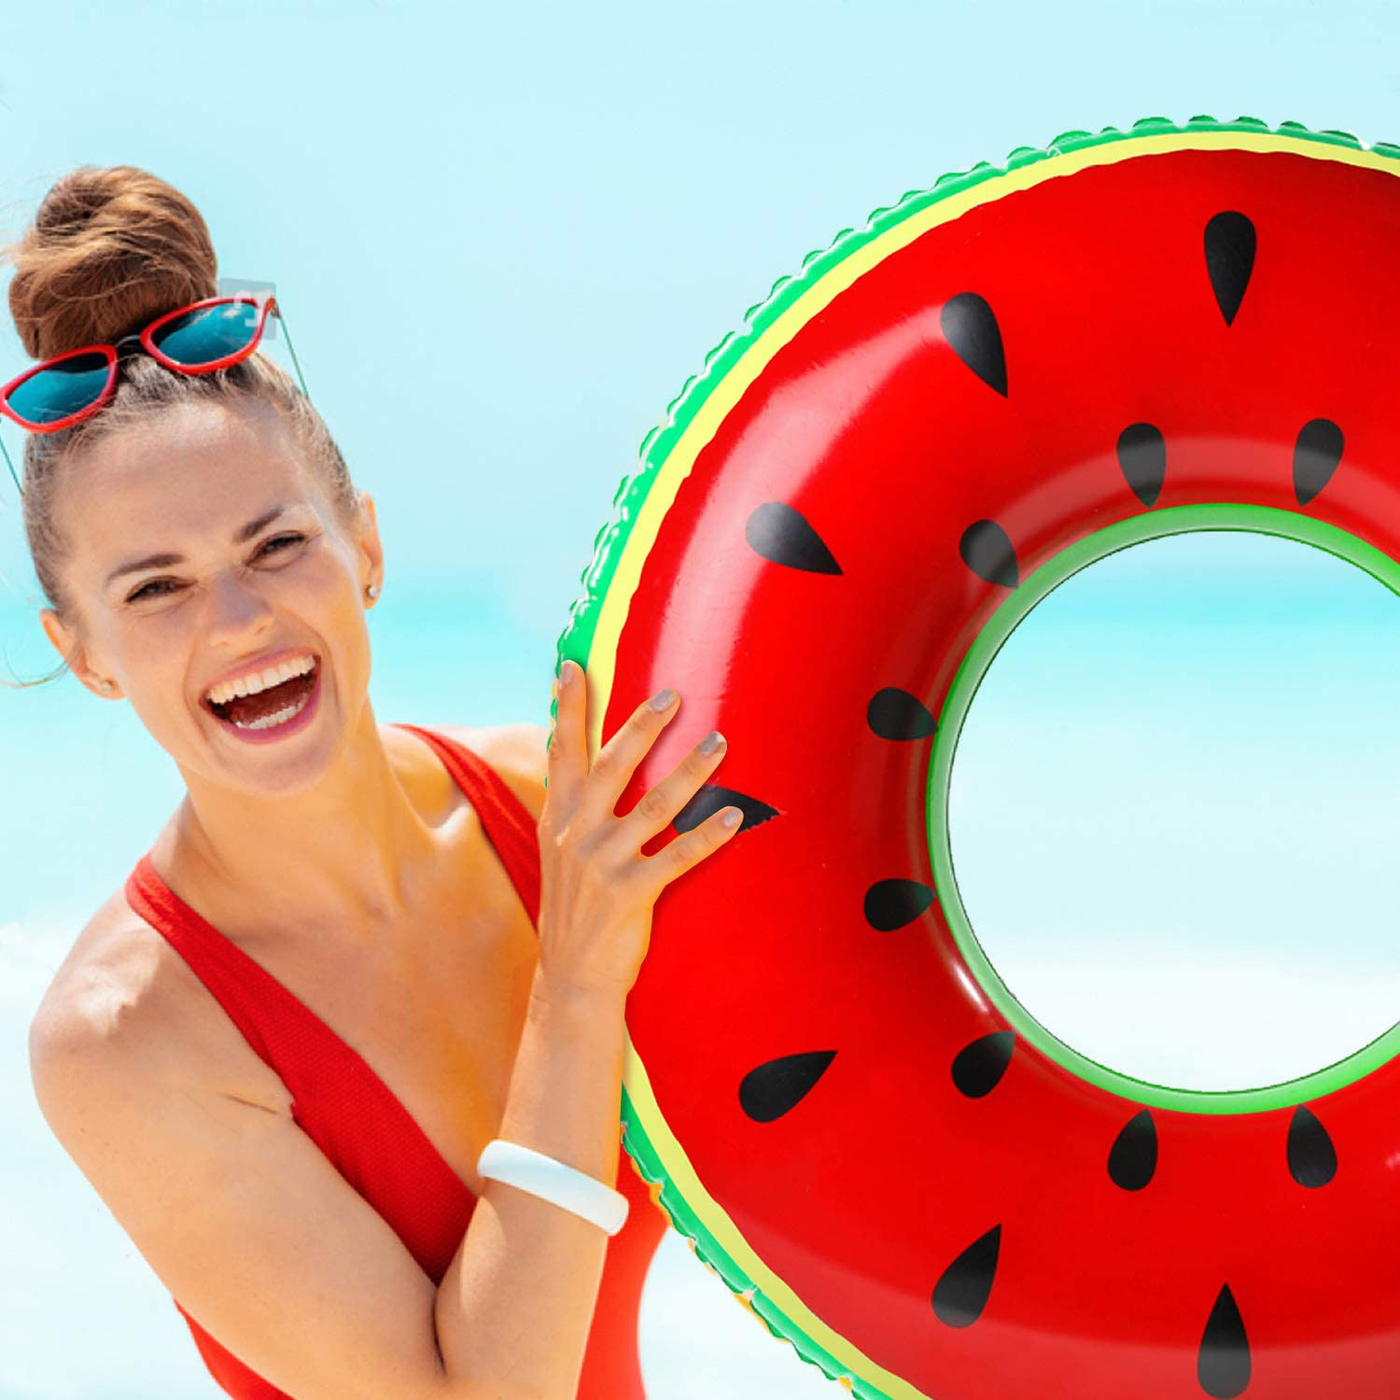 KIDPAR 4 Pcs Pool Floats for Adults Kids with 2 Pcs Cup Holders,Inflatable Large Fruit Swimming Tubes Rings Rafts for River Tubing Games,Summer Outdoor Fun,Beach Toy Lake Time 33 Inches